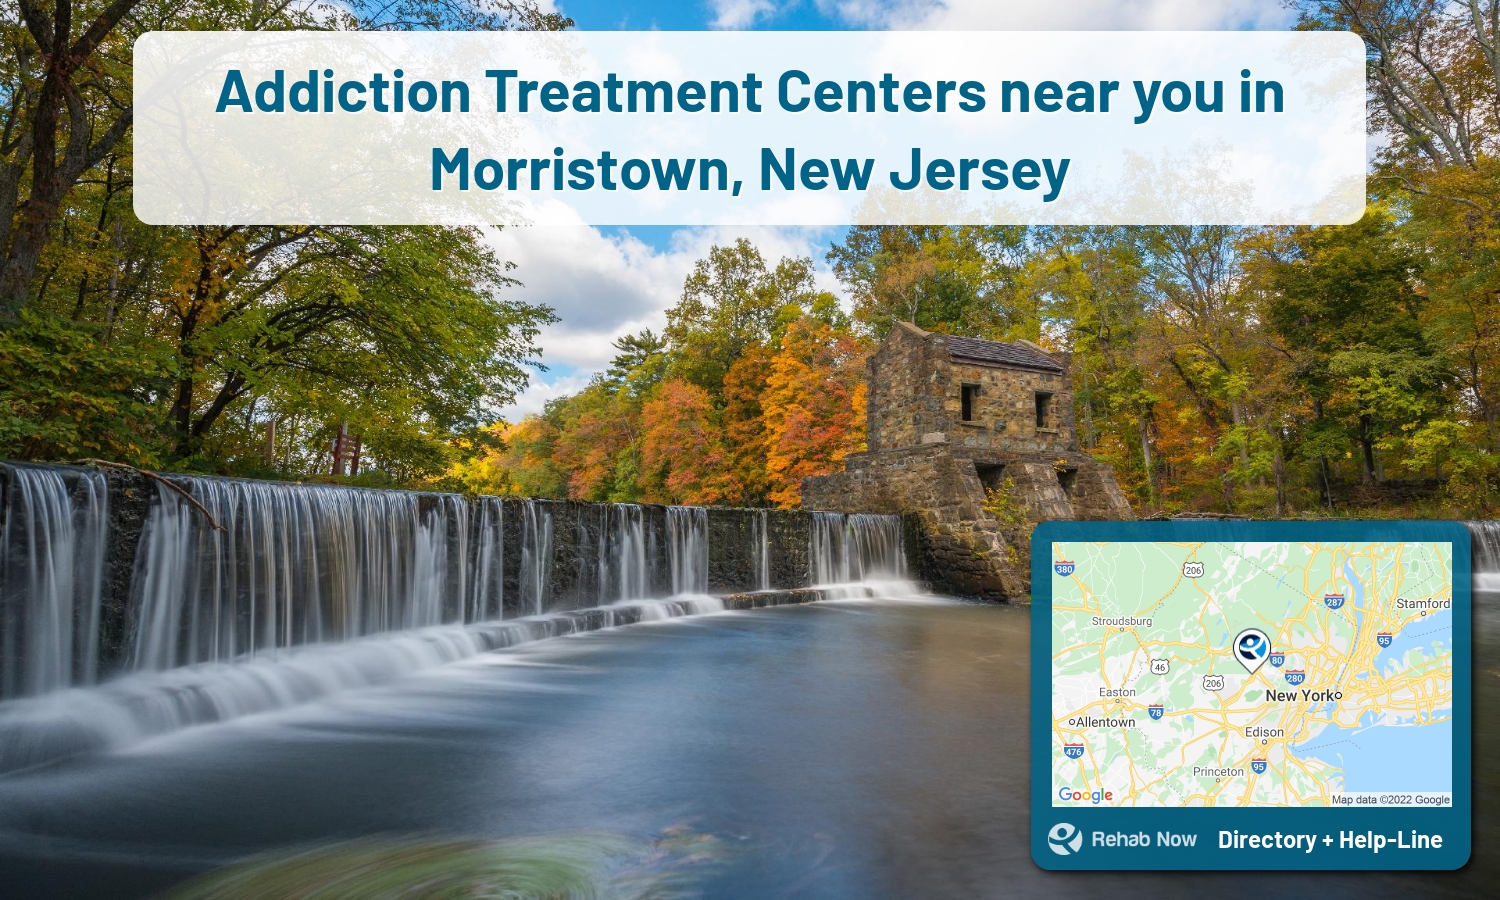 Morristown, NJ Treatment Centers. Find drug rehab in Morristown, New Jersey, or detox and treatment programs. Get the right help now!